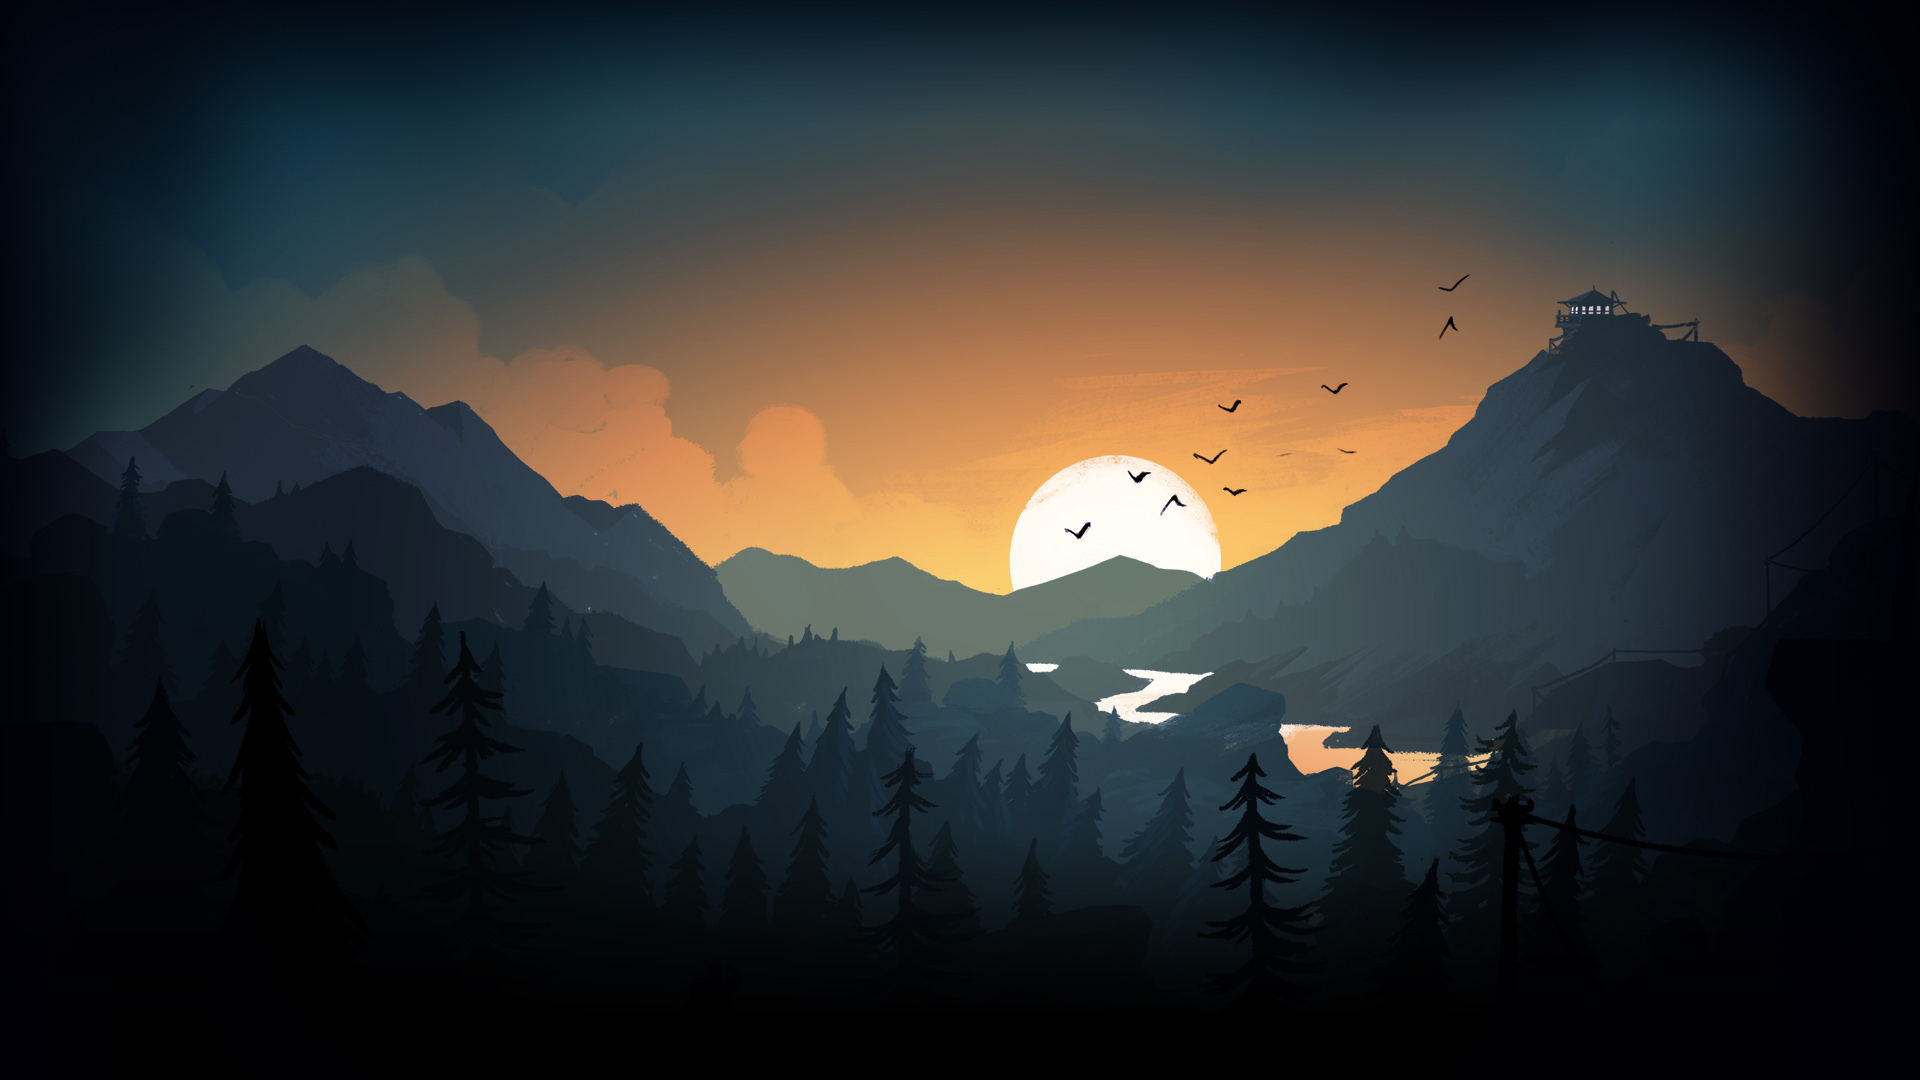 new background images firewatch free download